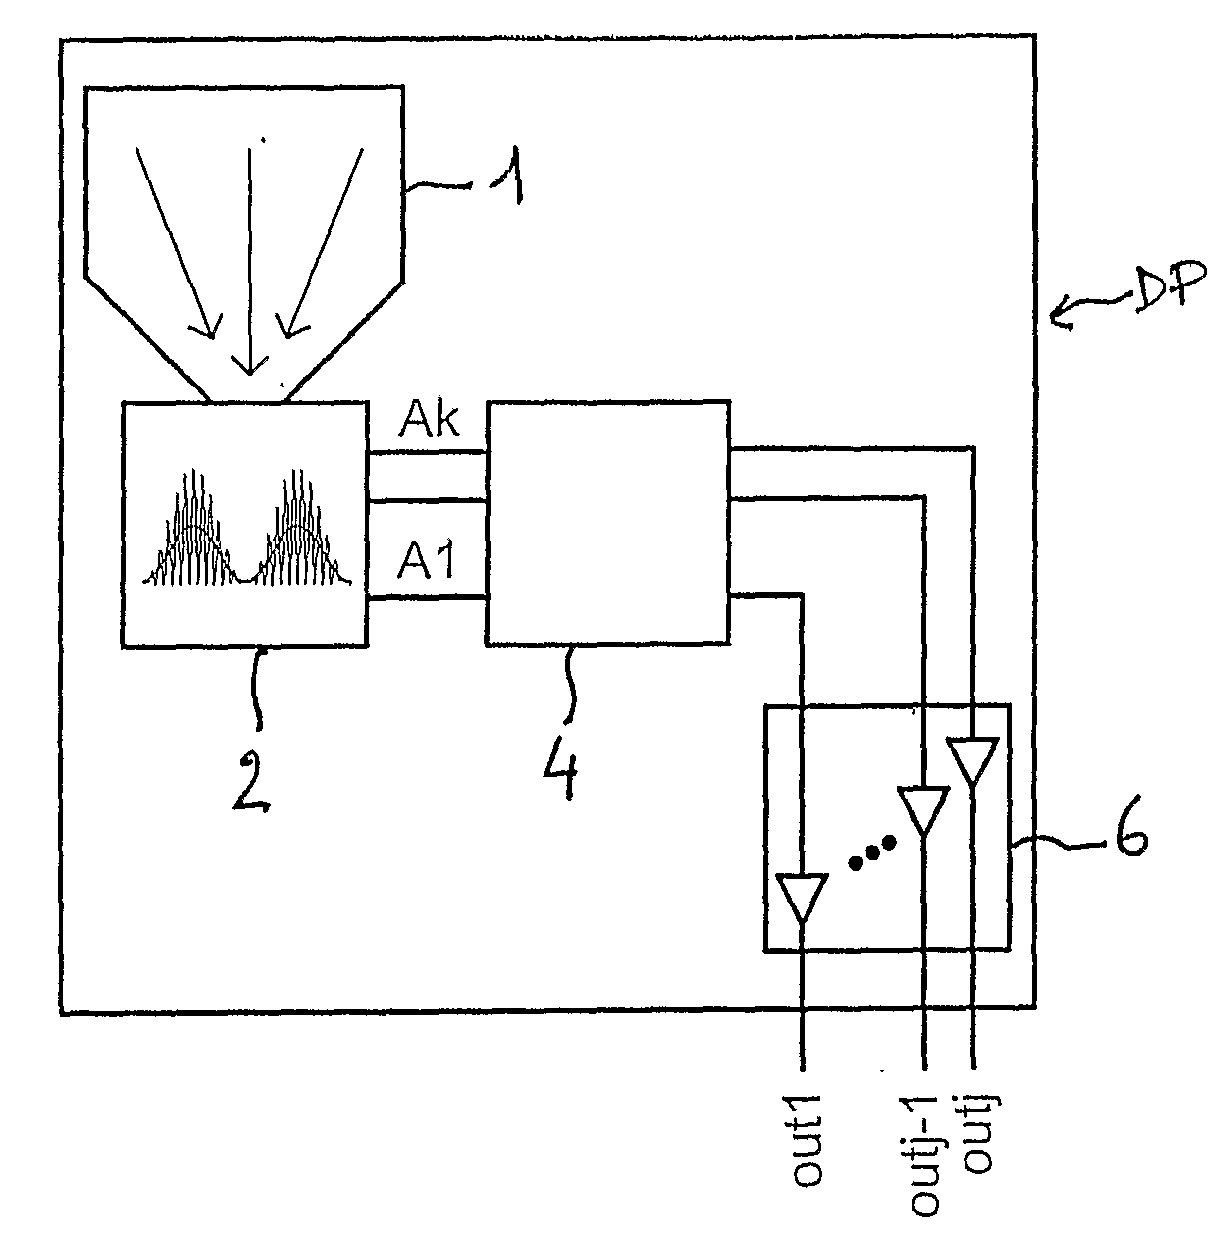 Device and Method for the Demodulation Electromagnetic Wave Fields